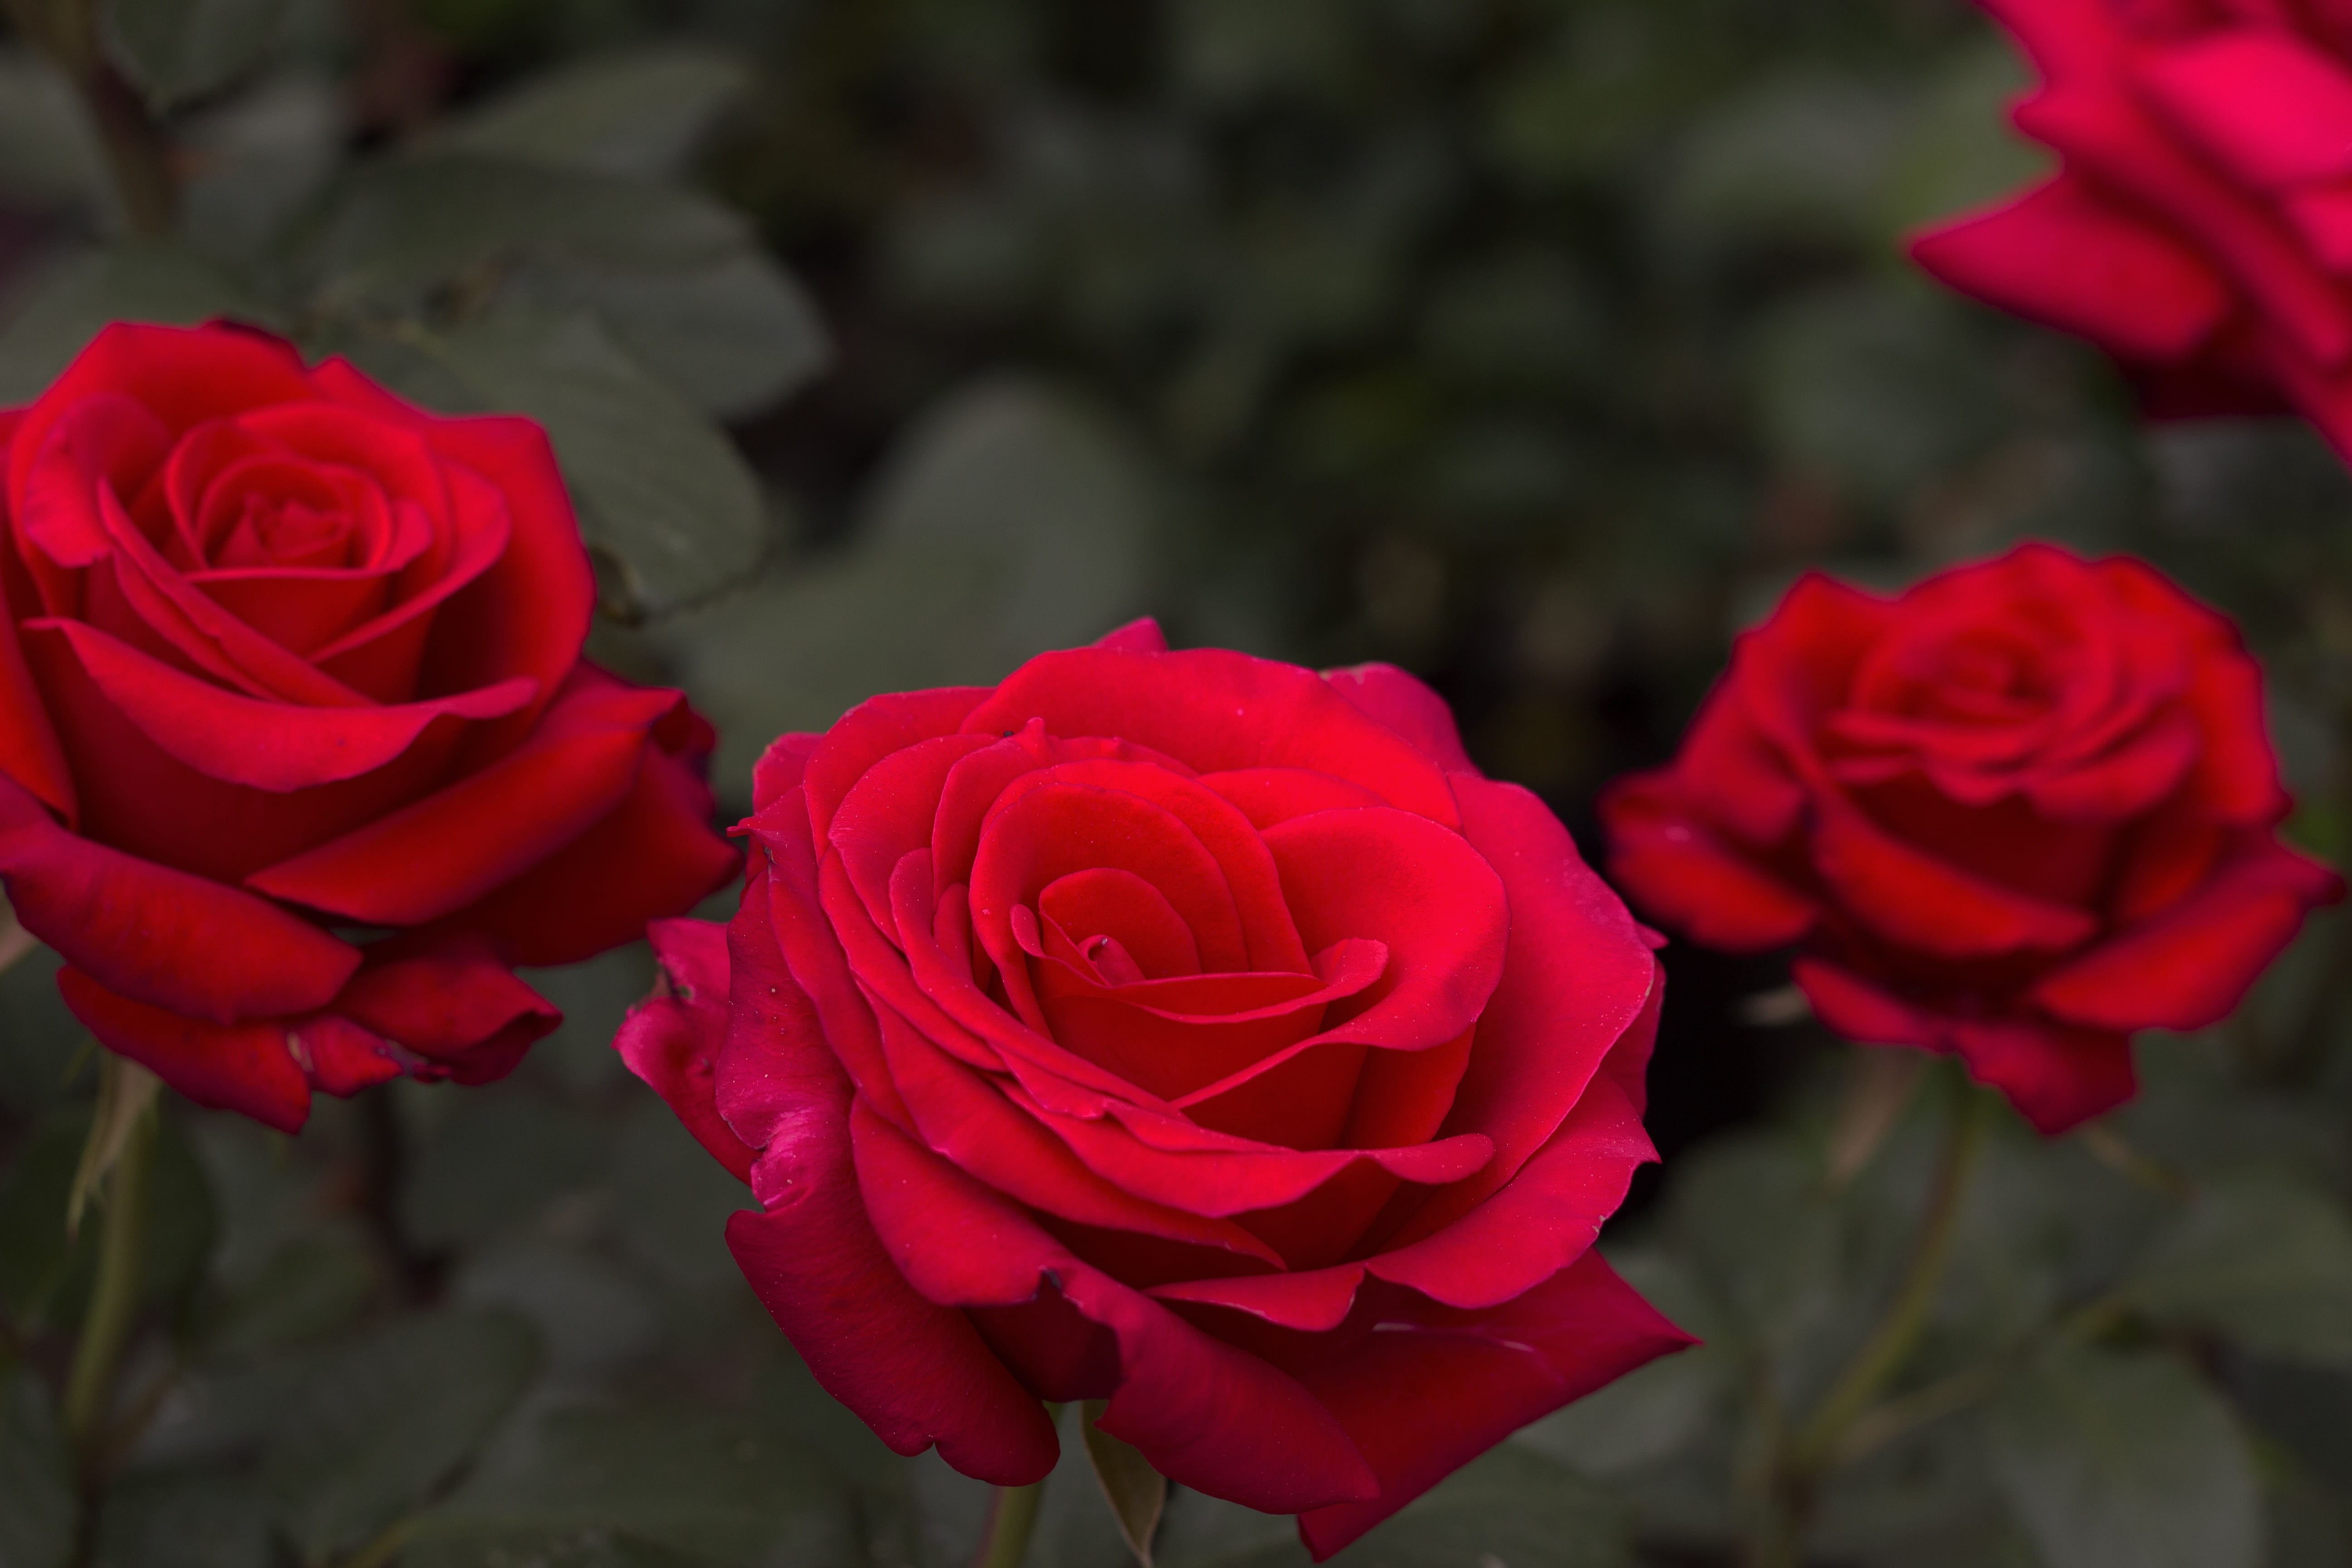 three red rose flowers focus photography, vibrant, red roses